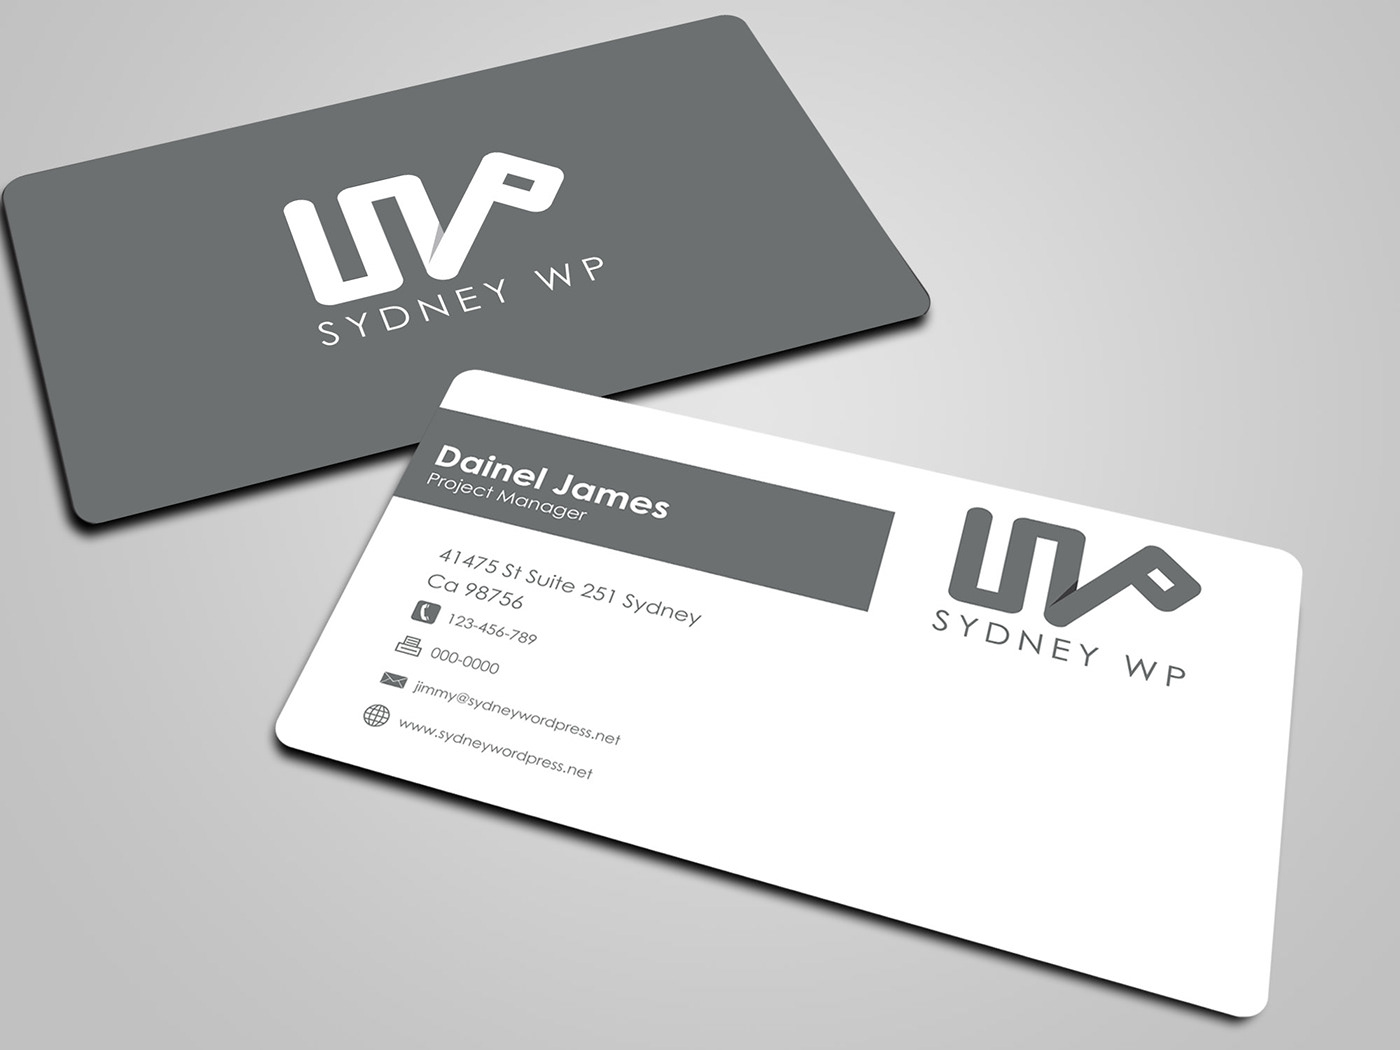 Design Professional Business Card Within 24 Hrs 